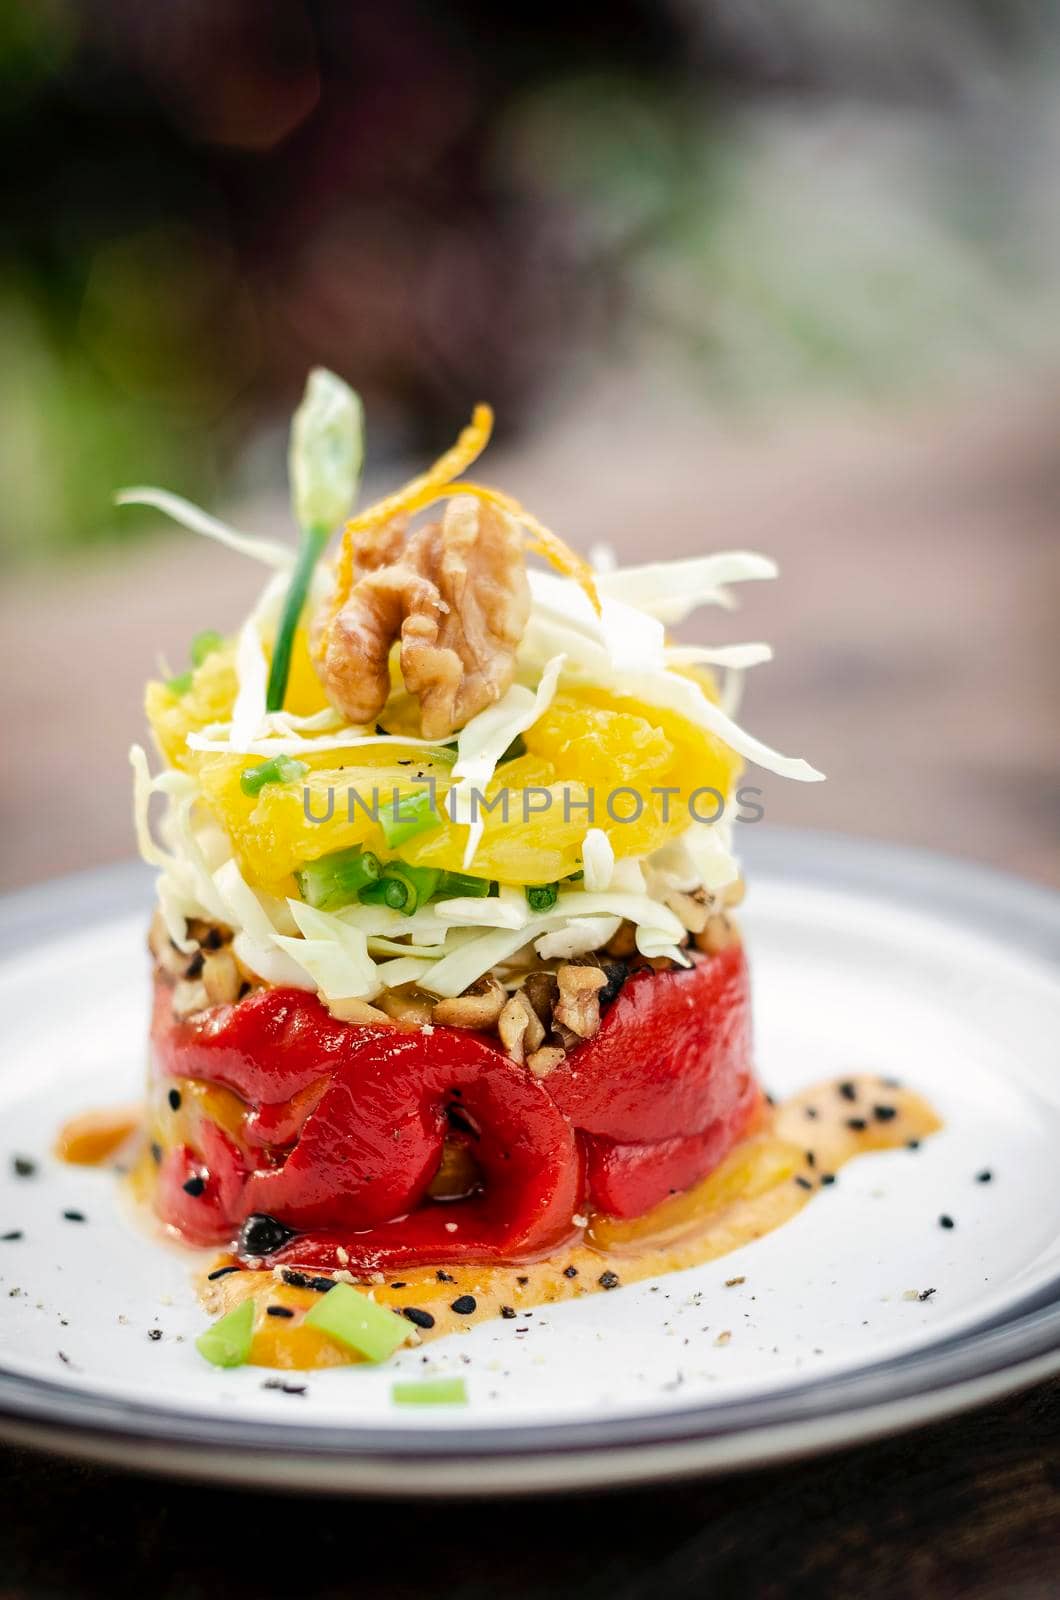 roasted red bell pepper with orange quinoa and walnut healthy vegan tapas appetizer snack